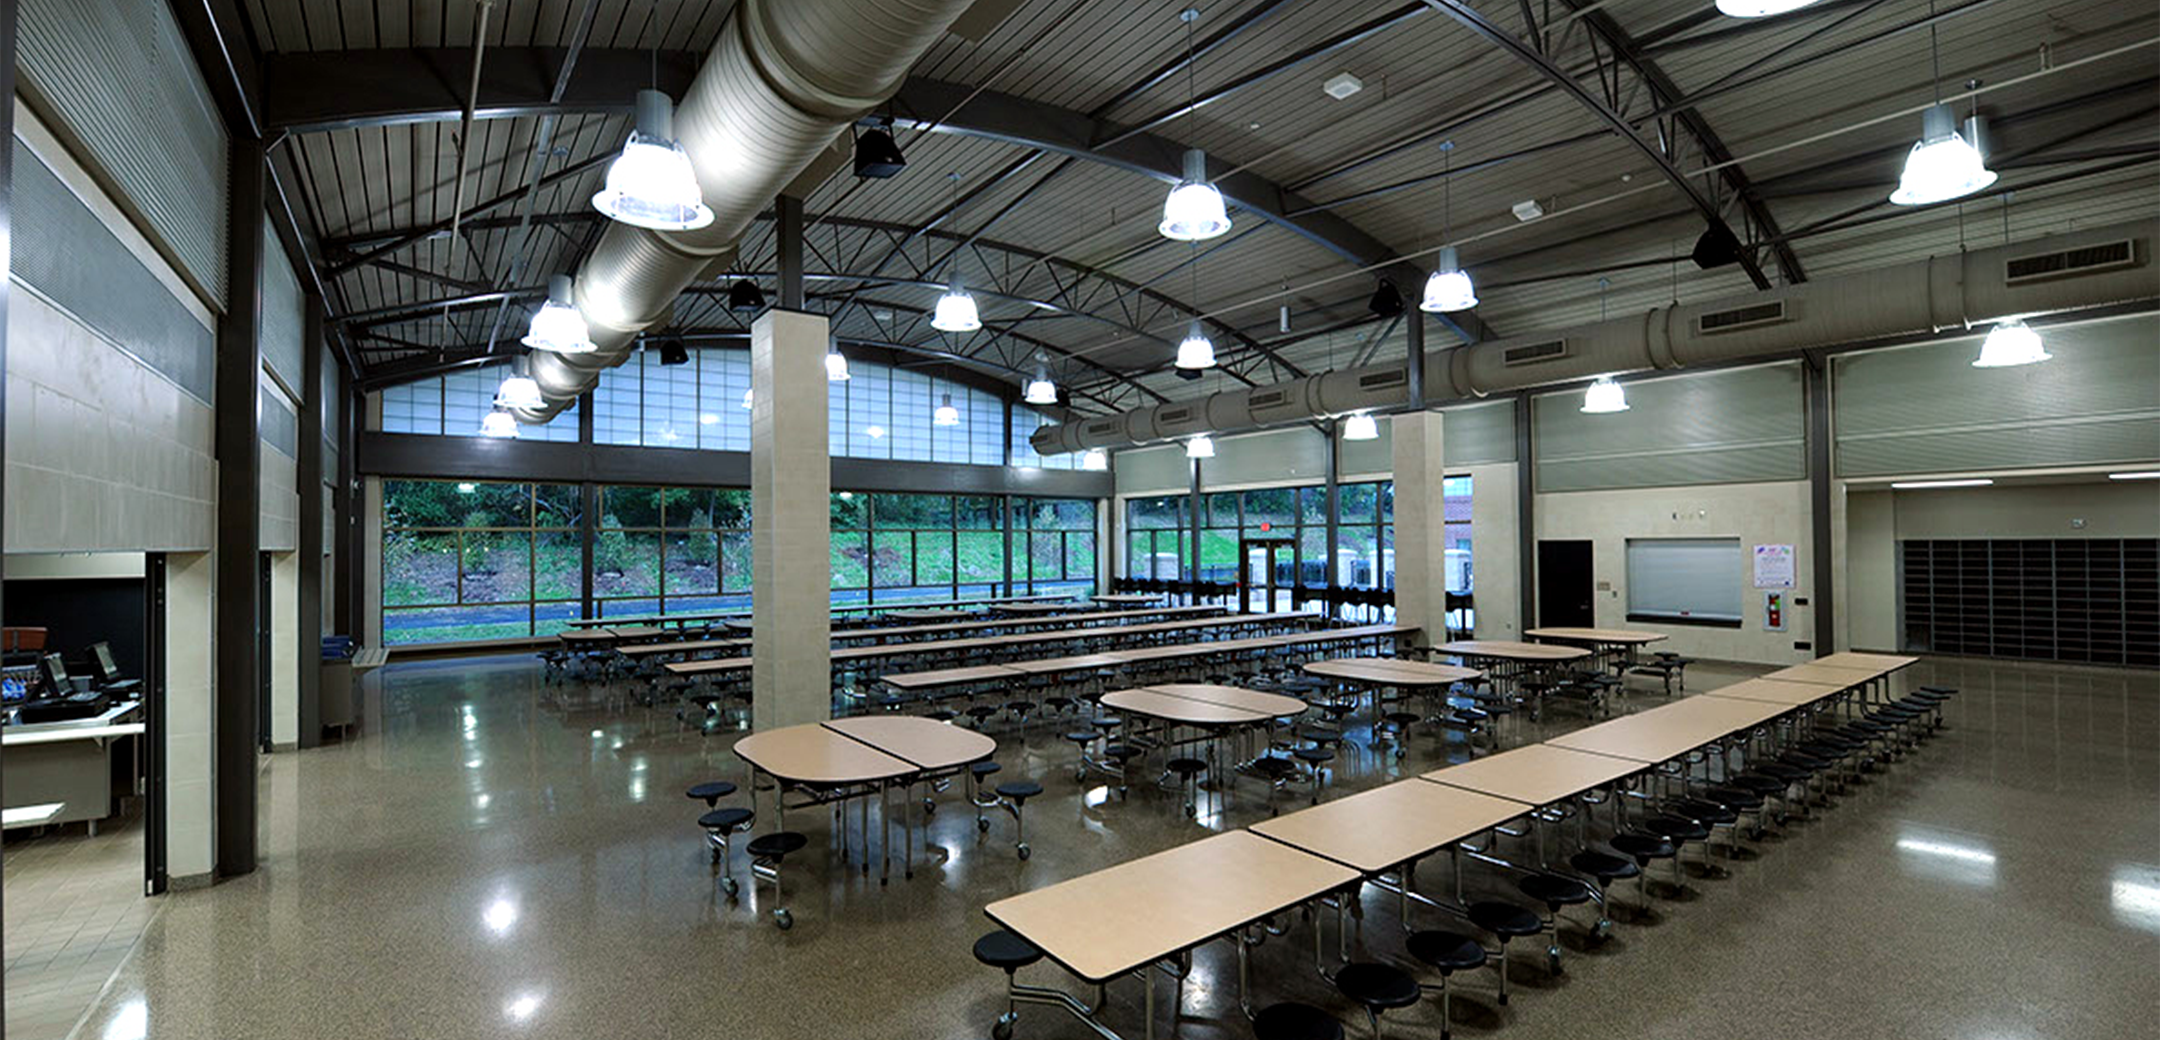 An interior view of the Phoenixville Middle School dining hall, showcasing the rows of dining seating, arched industrial design ceiling and all glass window back wall.